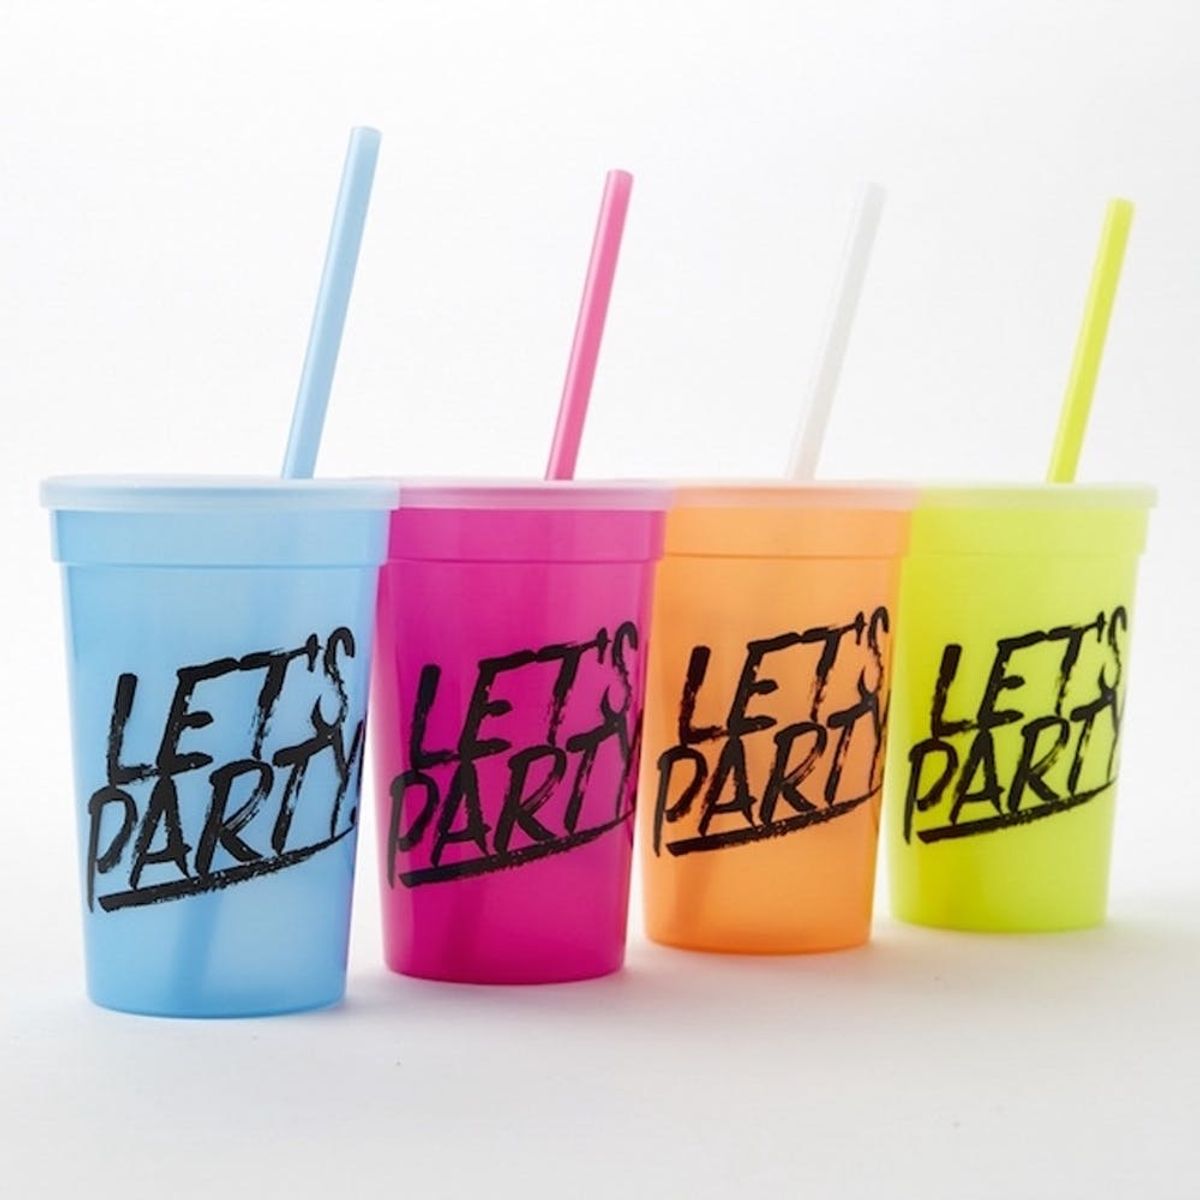 13 Pretty Party Favors for Your Fab Guests